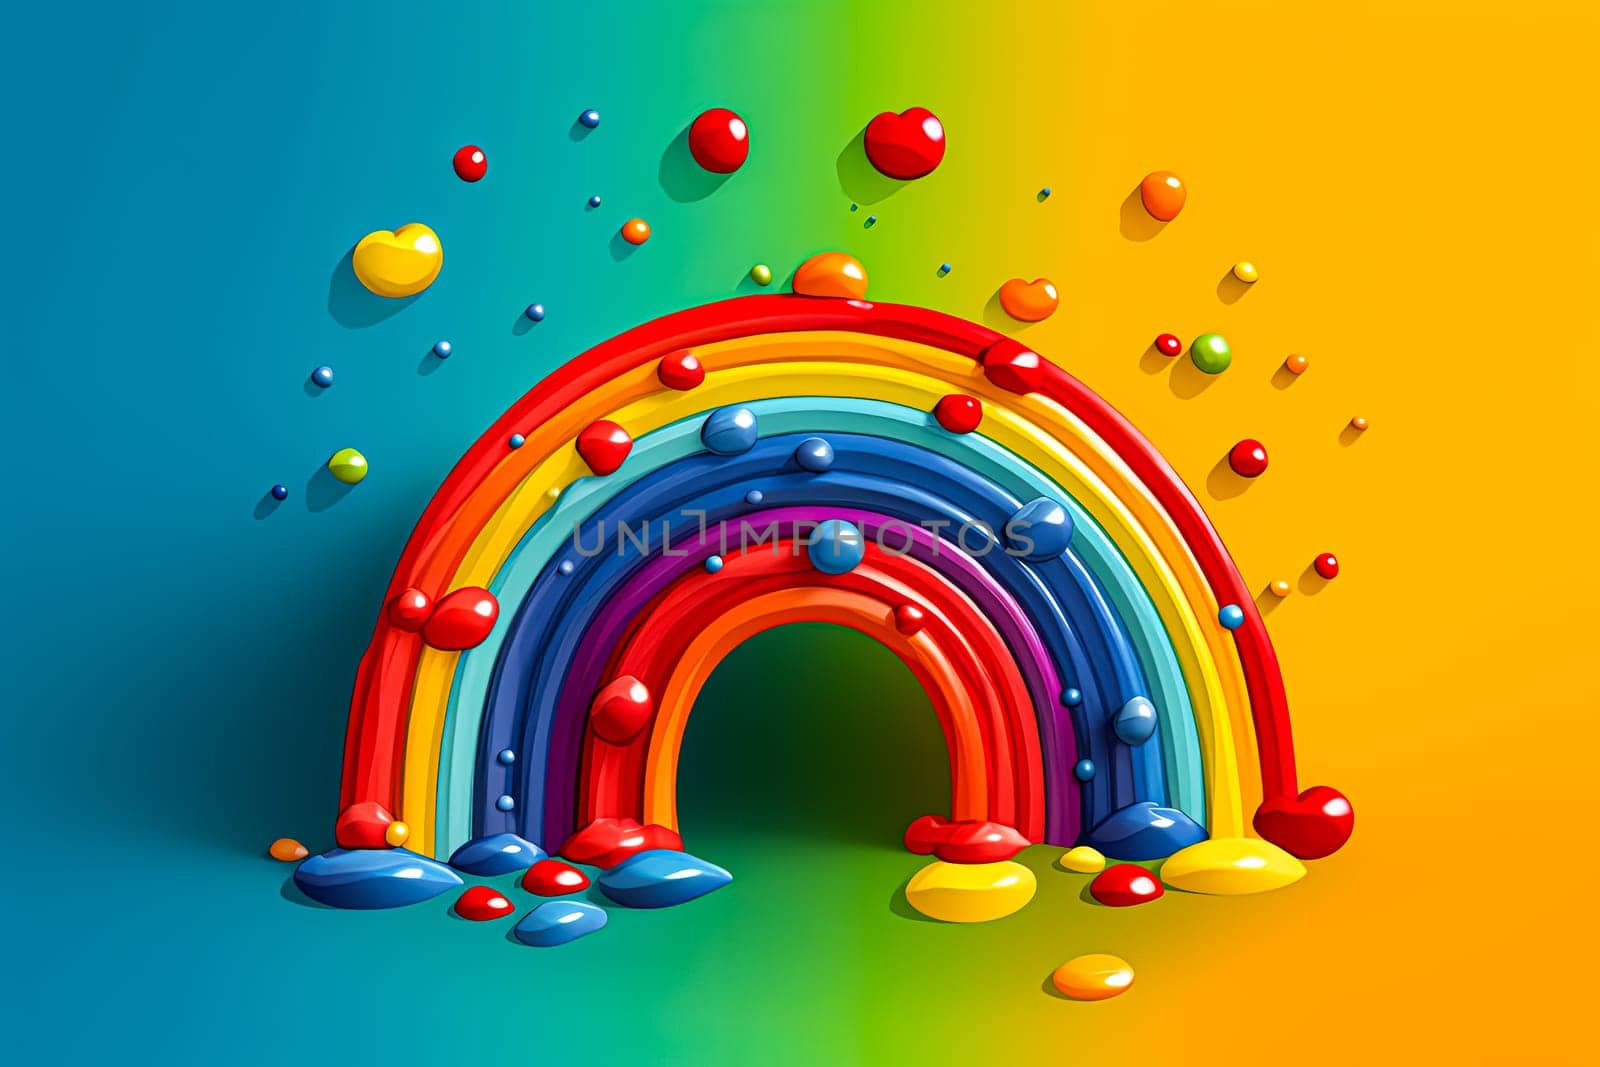 A rainbow with drops of water on it. The drops are of different colors, creating a vibrant and lively atmosphere